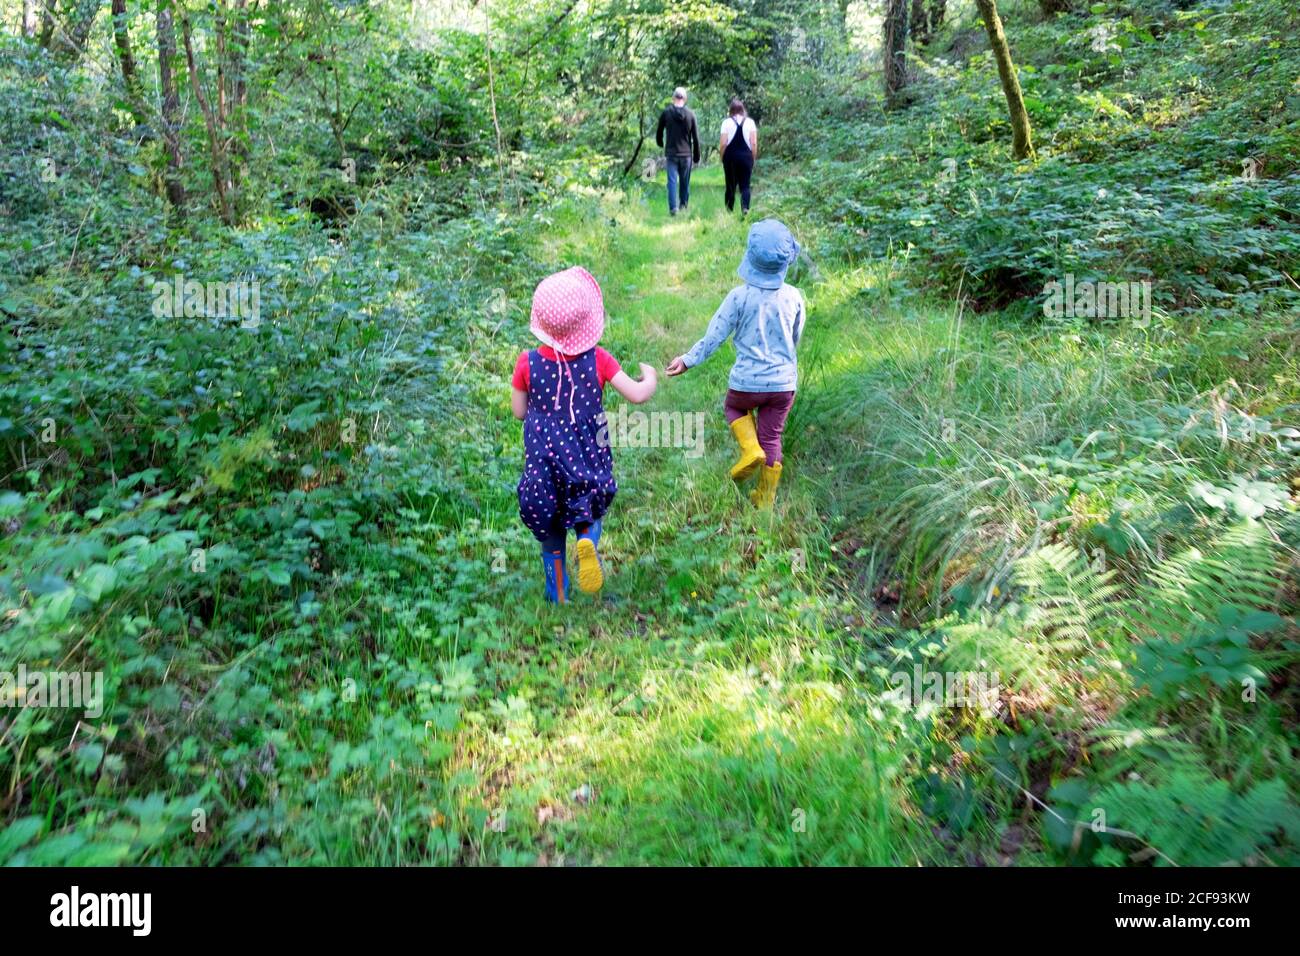 Children kids back rear view walking on grassy path with adults through overgrown woodland on summer holiday in Carmarthenshire Wales UK KATHY DEWITT Stock Photo